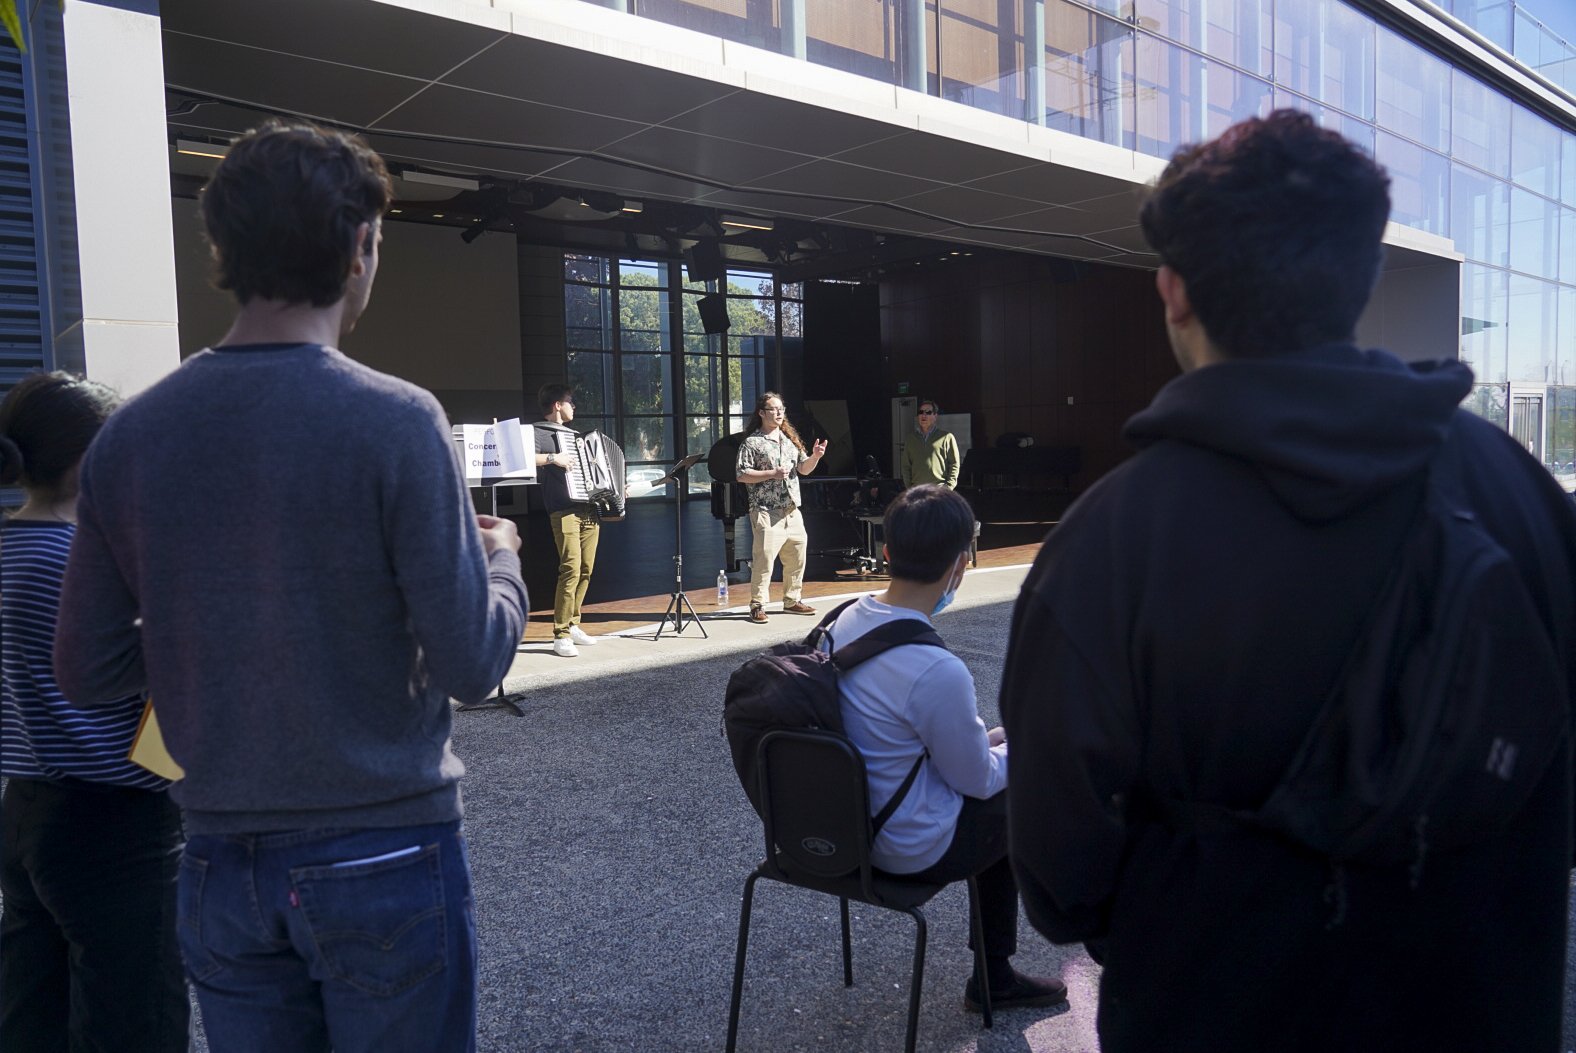  Onlookers observe performances by student musicians during an open house hosted by the faculty of the Santa Monica College Music Department Tuesday, Nov. 15 2022. 